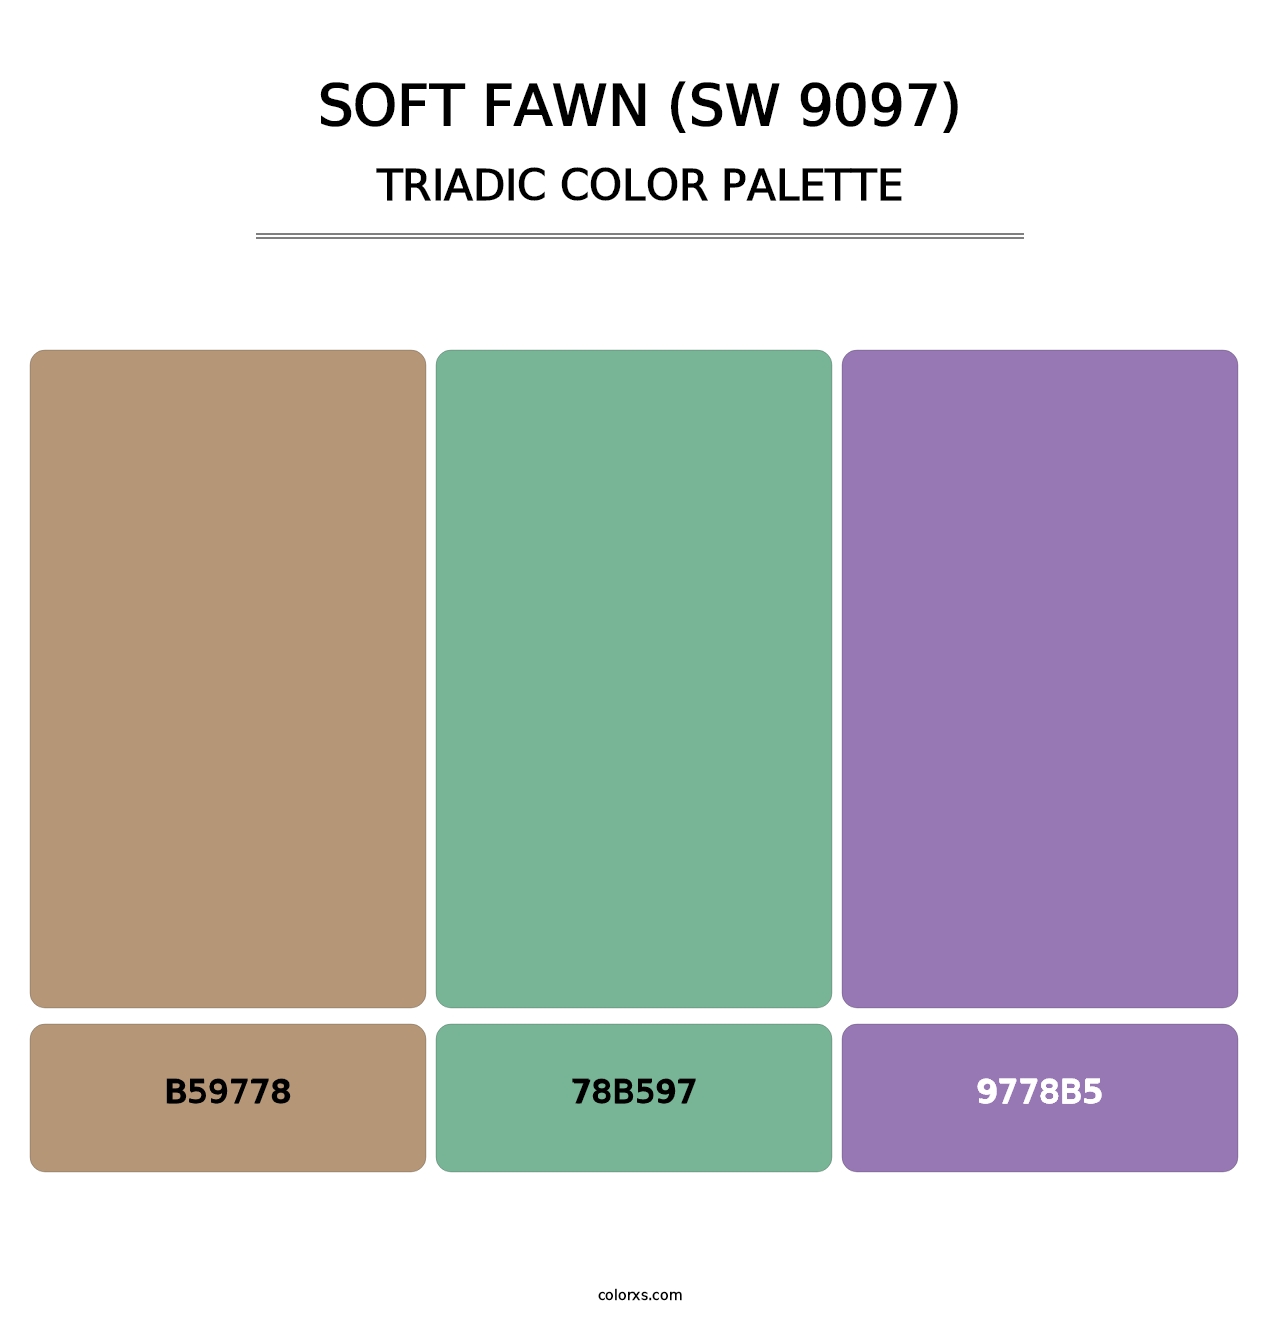 Soft Fawn (SW 9097) - Triadic Color Palette